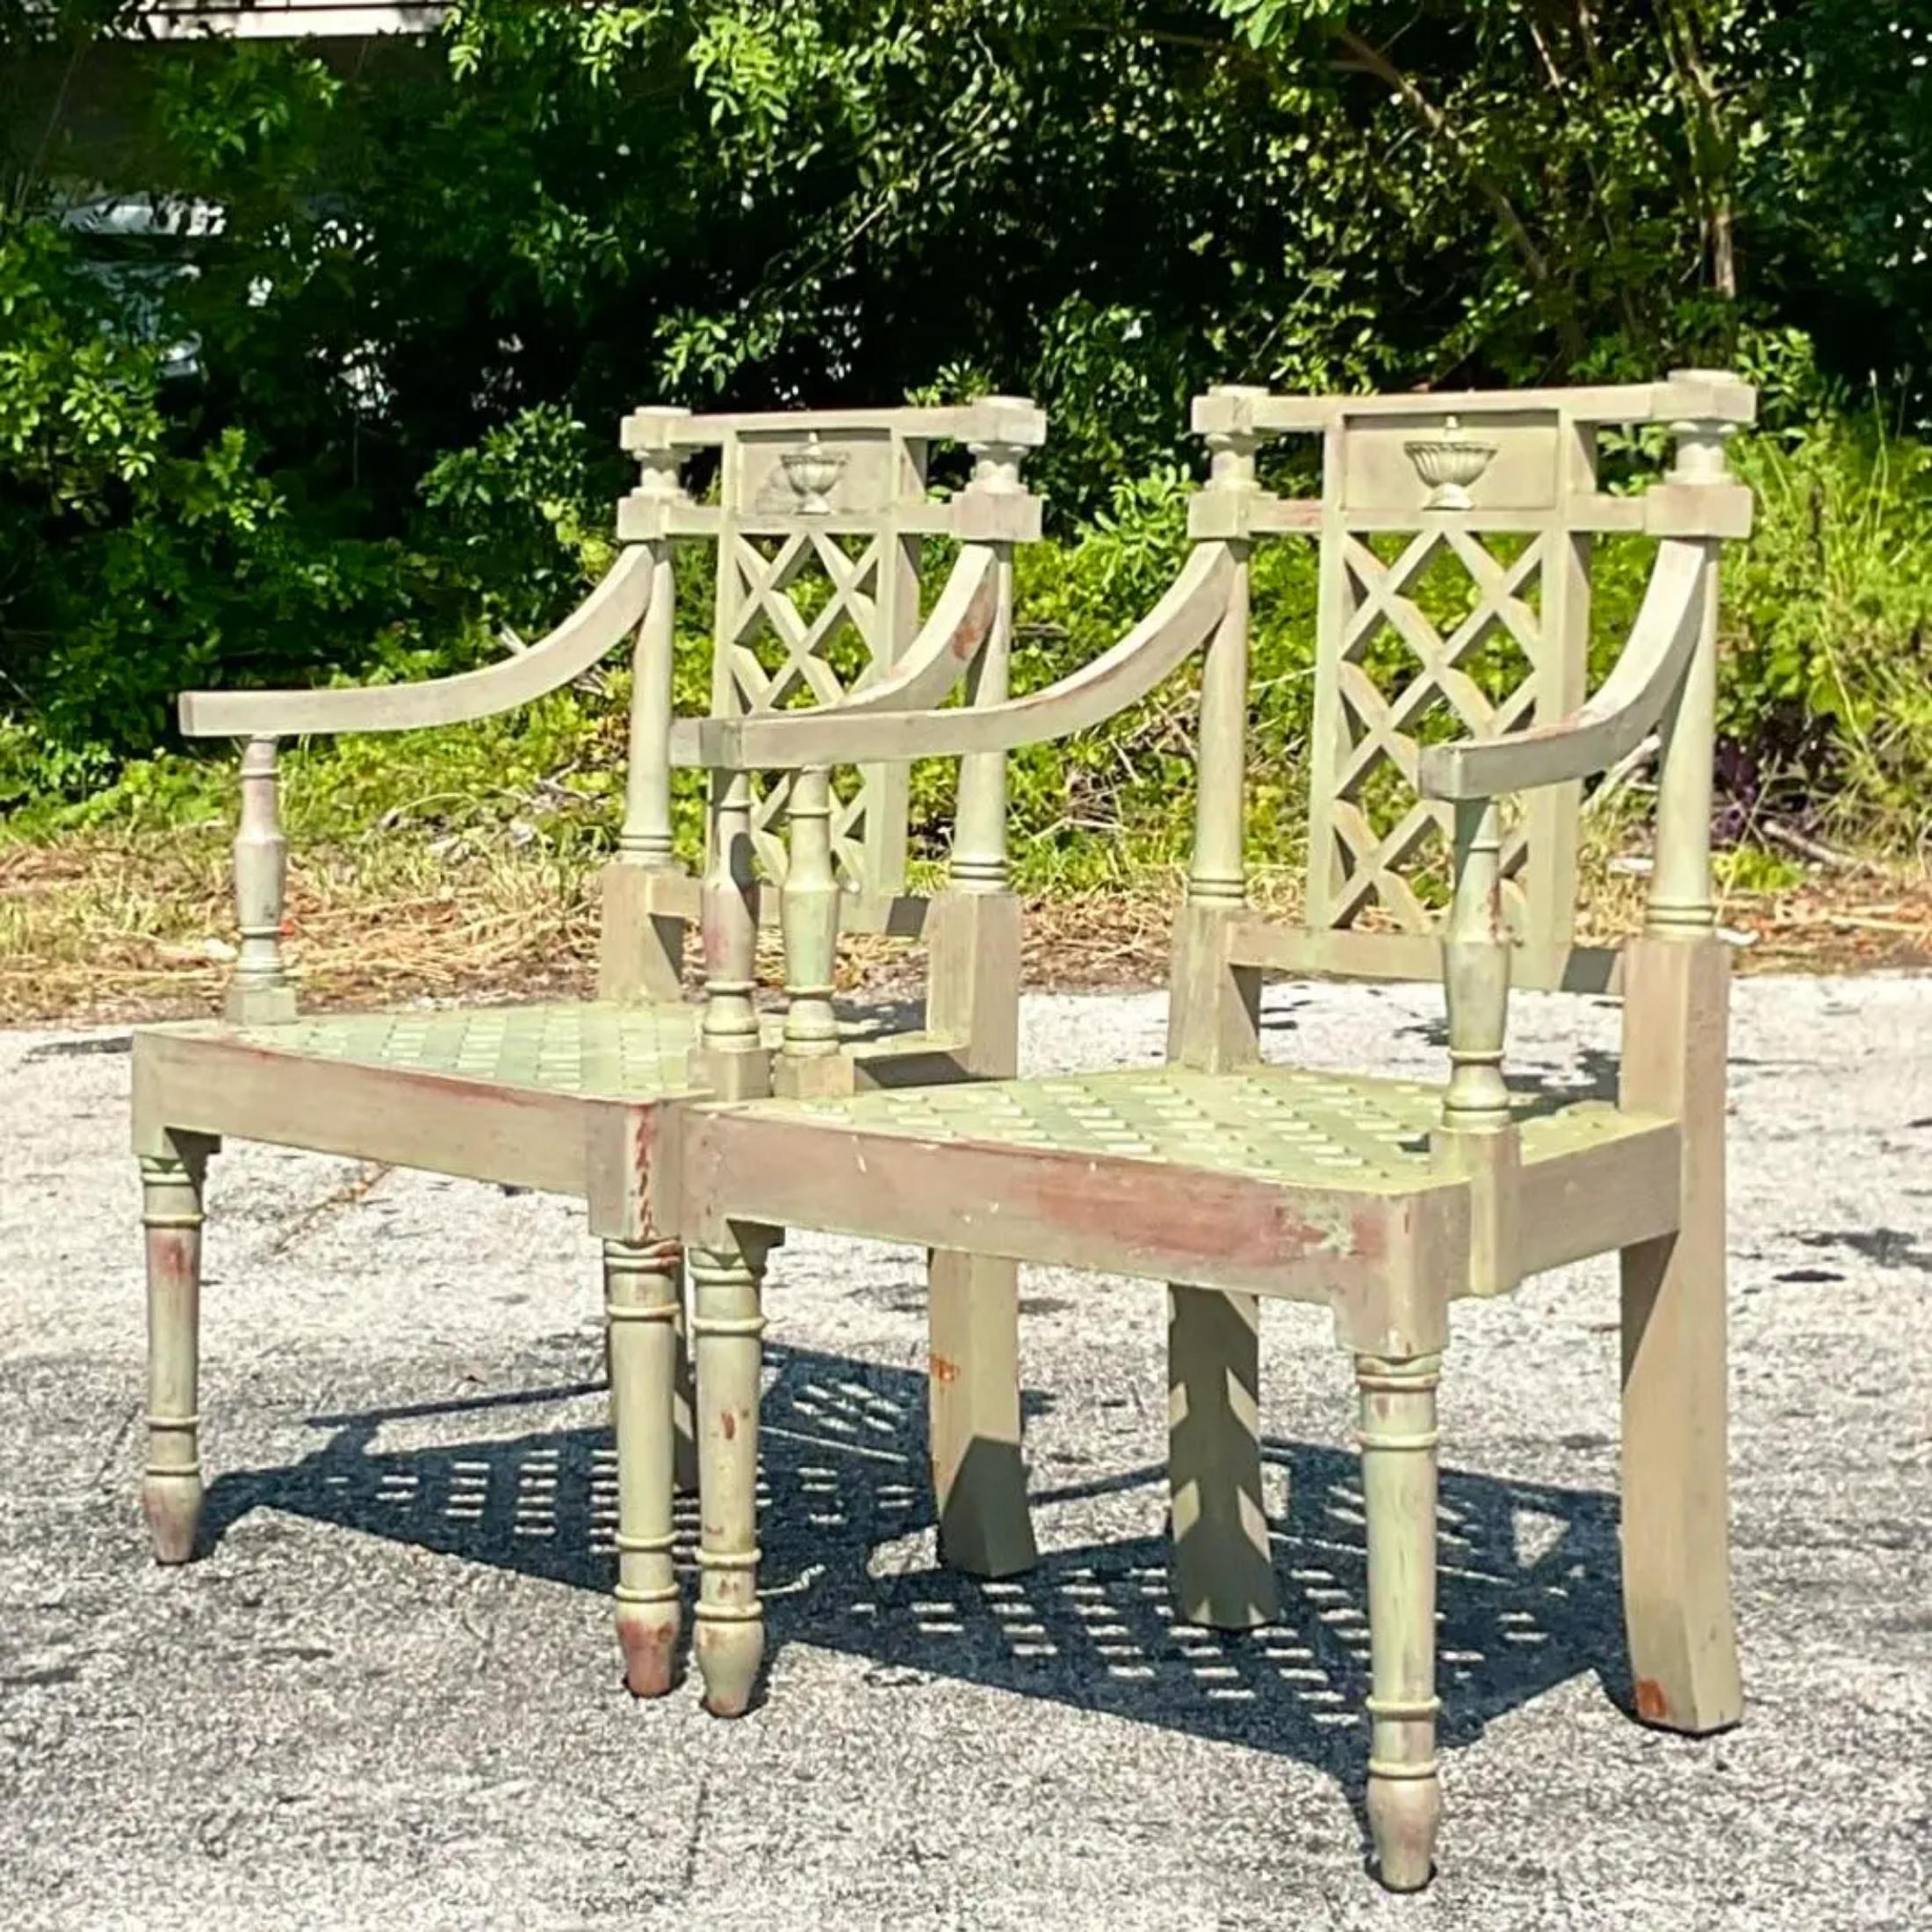 A stunning pair of vintage Regency Victorian garden chairs. A chic Hepplewhite design in a sage green wash finish. Beautiful hand carved detail. Acquired from a Palm Beach estate